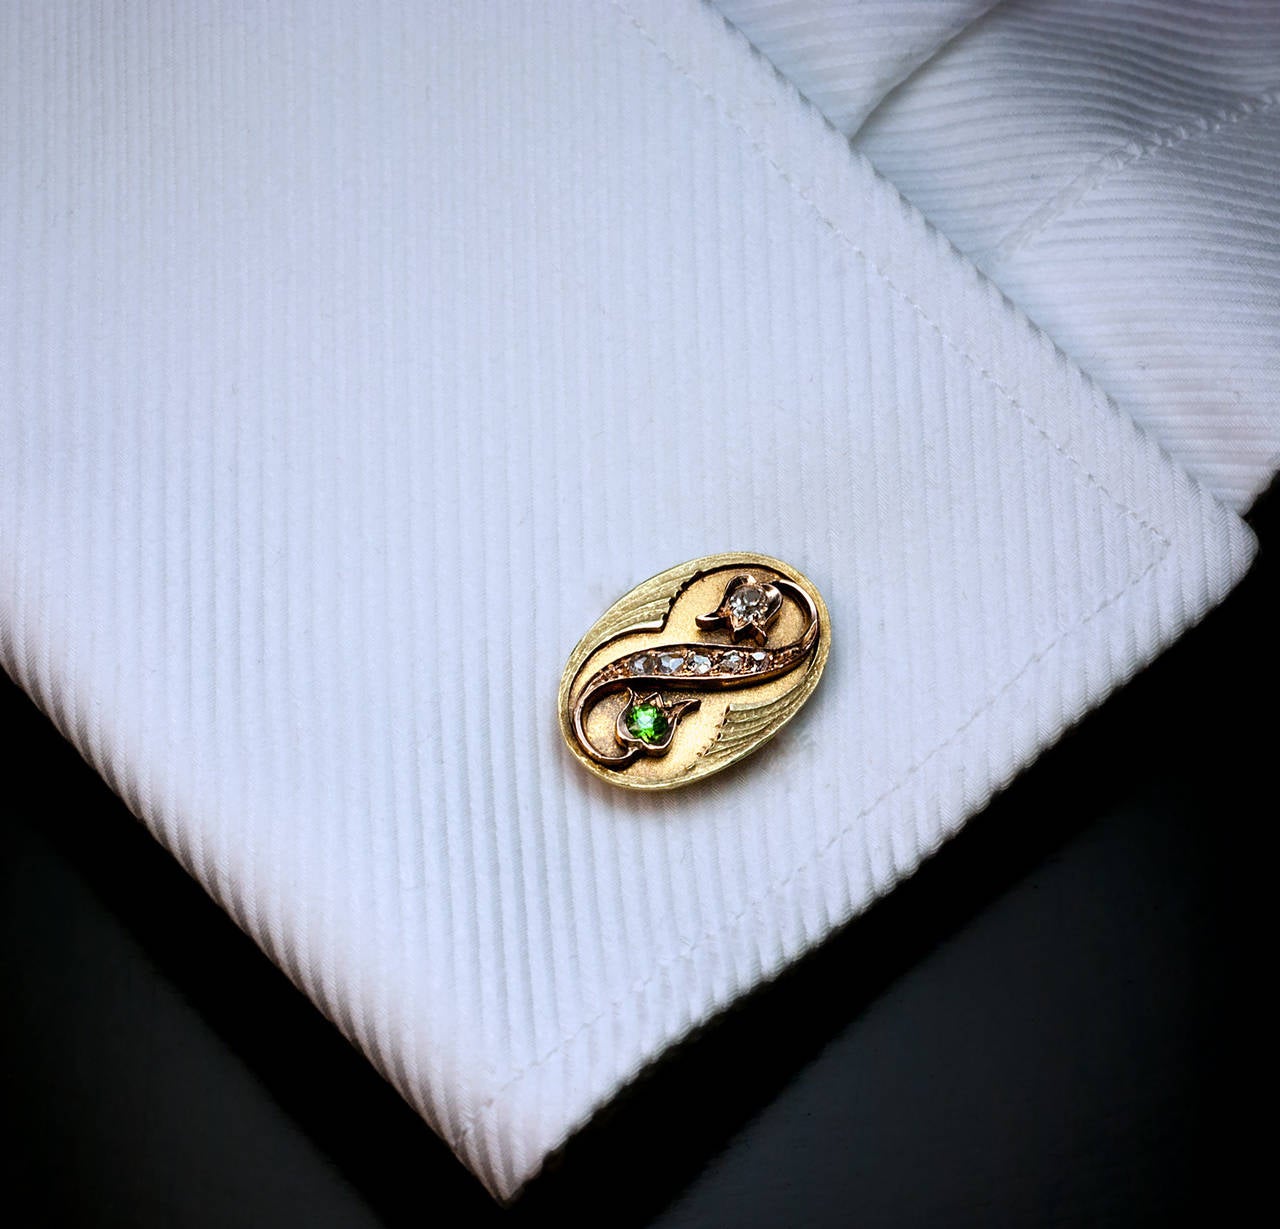 Made in Moscow between 1899 and 1908

Marked with Russian assay mark and maker's initials

Greenish yellow 14K gold cufflinks with applied stylized flowers set with sparkling green Russian demantoids, old mine and old rose cut diamonds

Width